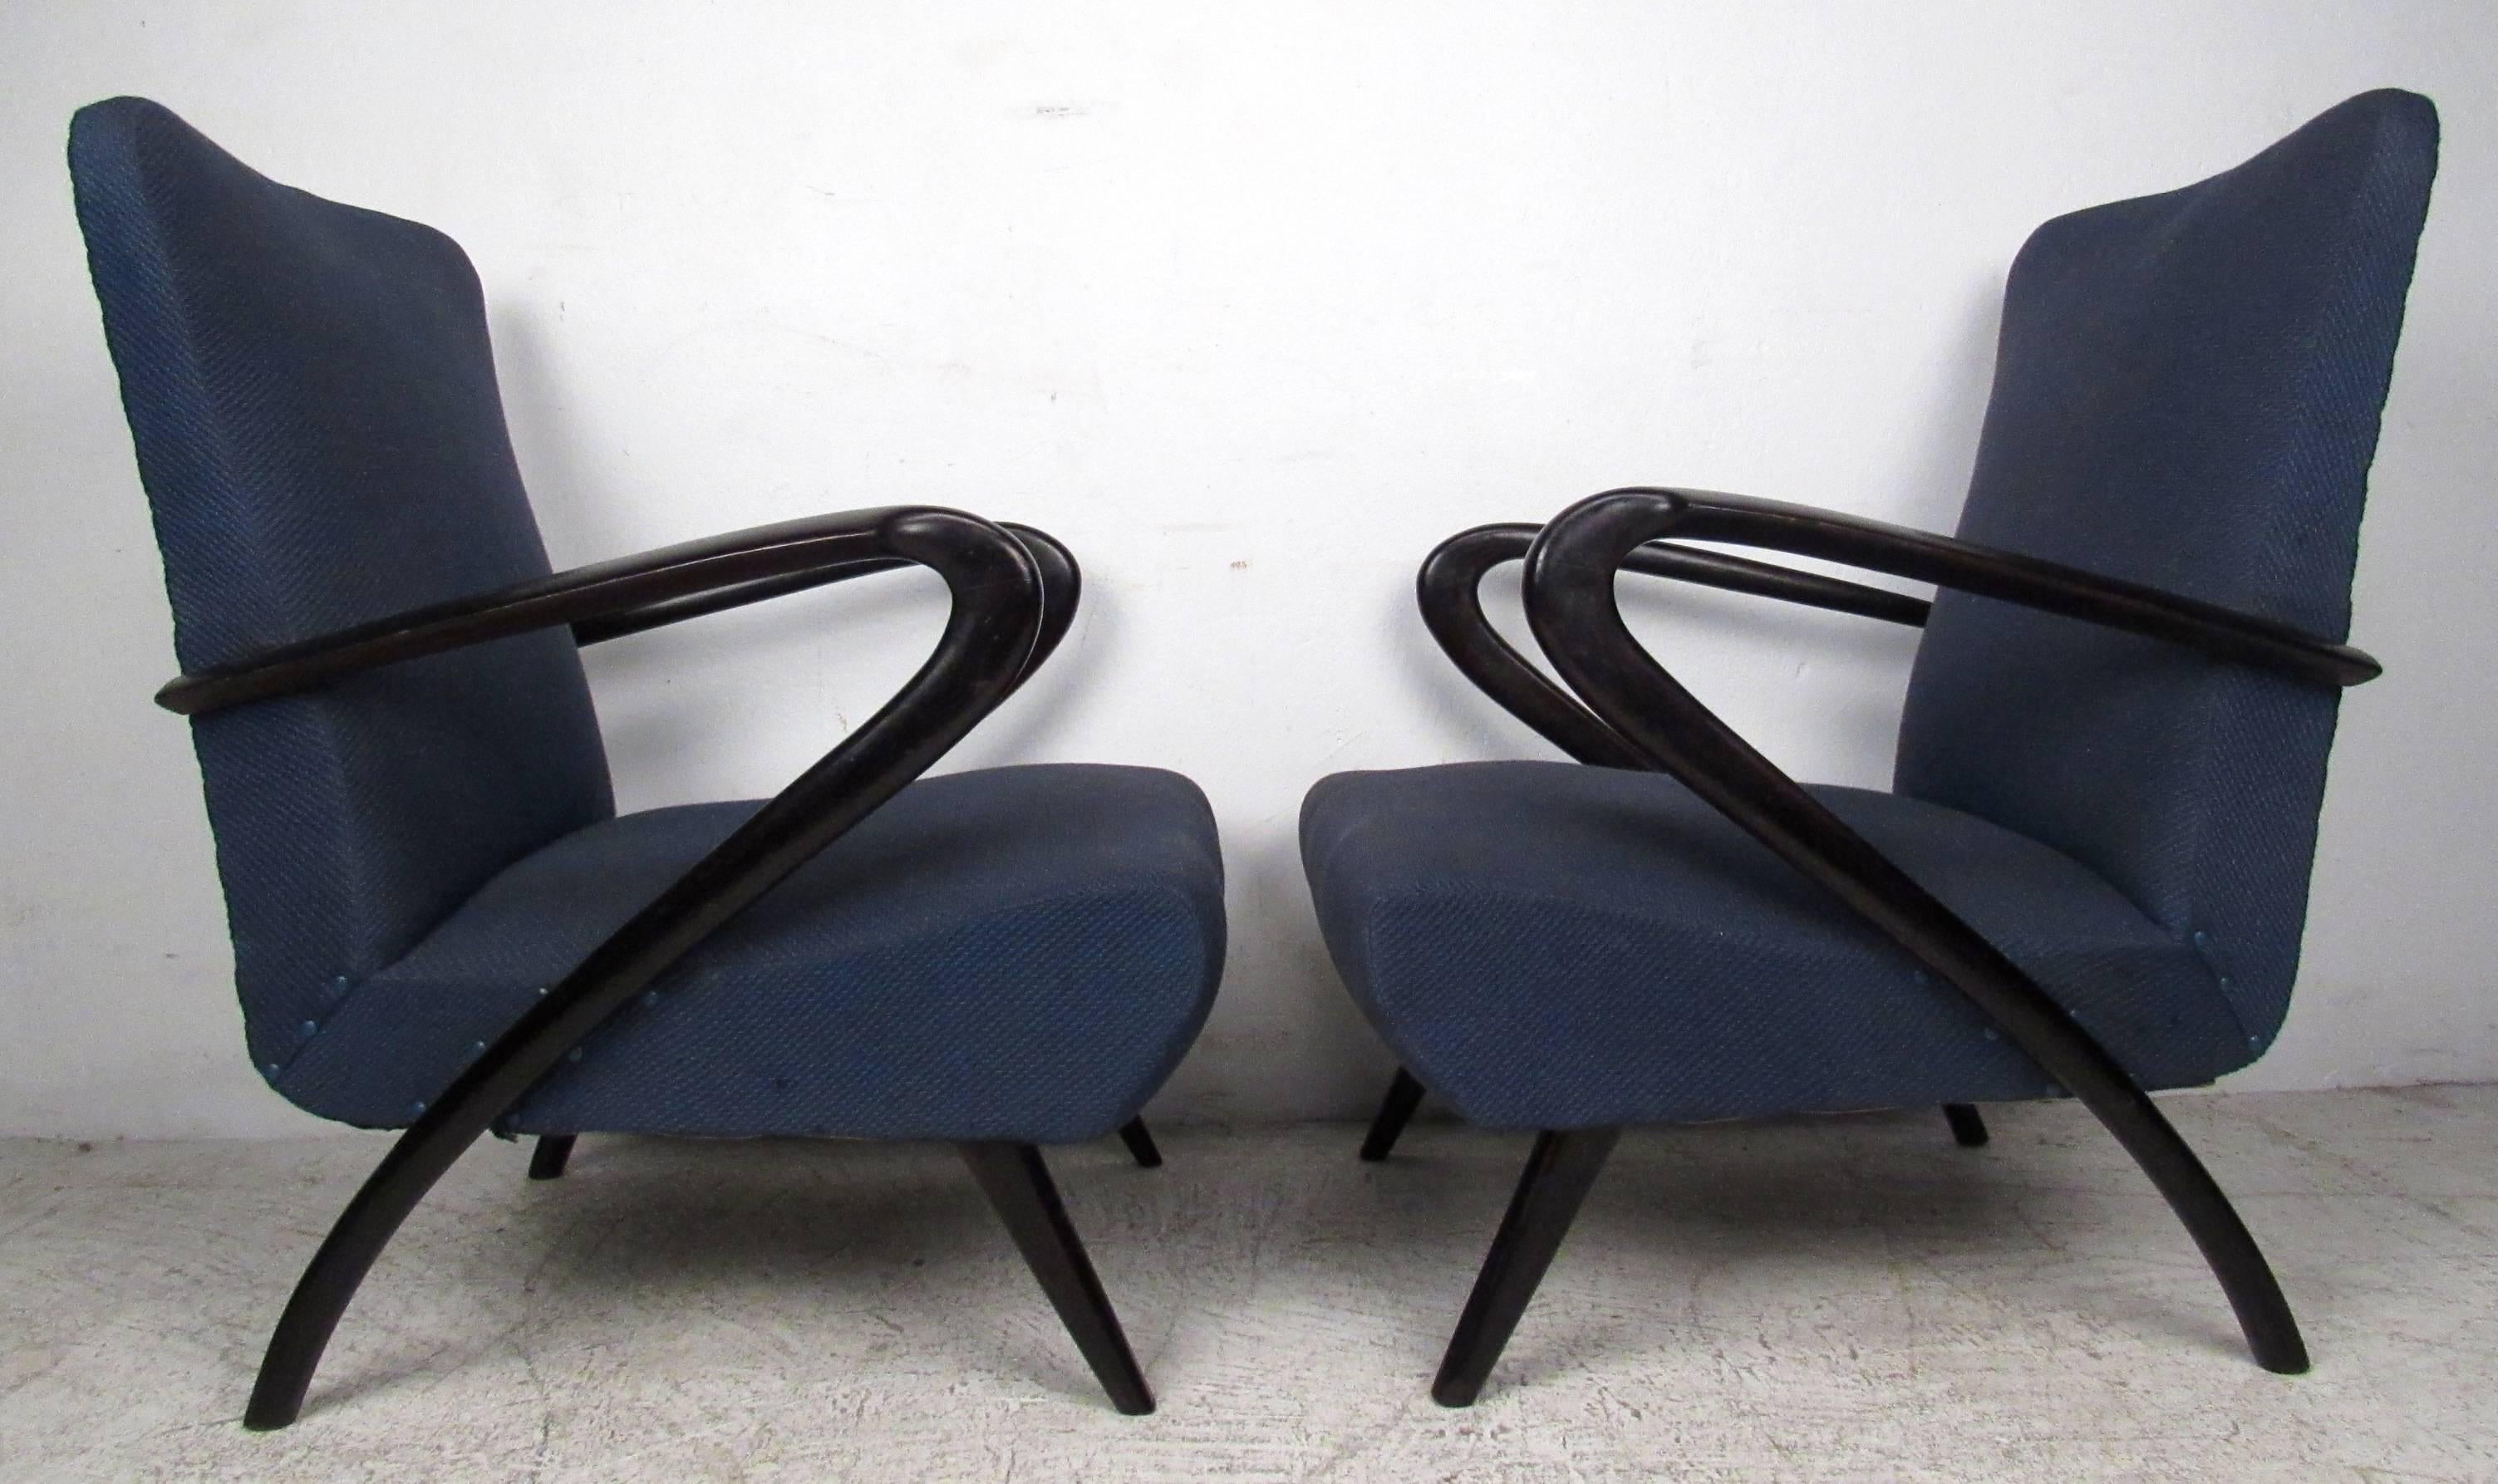 Stylish pair of vintage modern Italian armchairs make an elegant mid-century addition to home or business lounge or salon seating. The sculptural lacquered arms and seat back offer timeless comfort and the iconic style after Paolo Buffa. 
Please